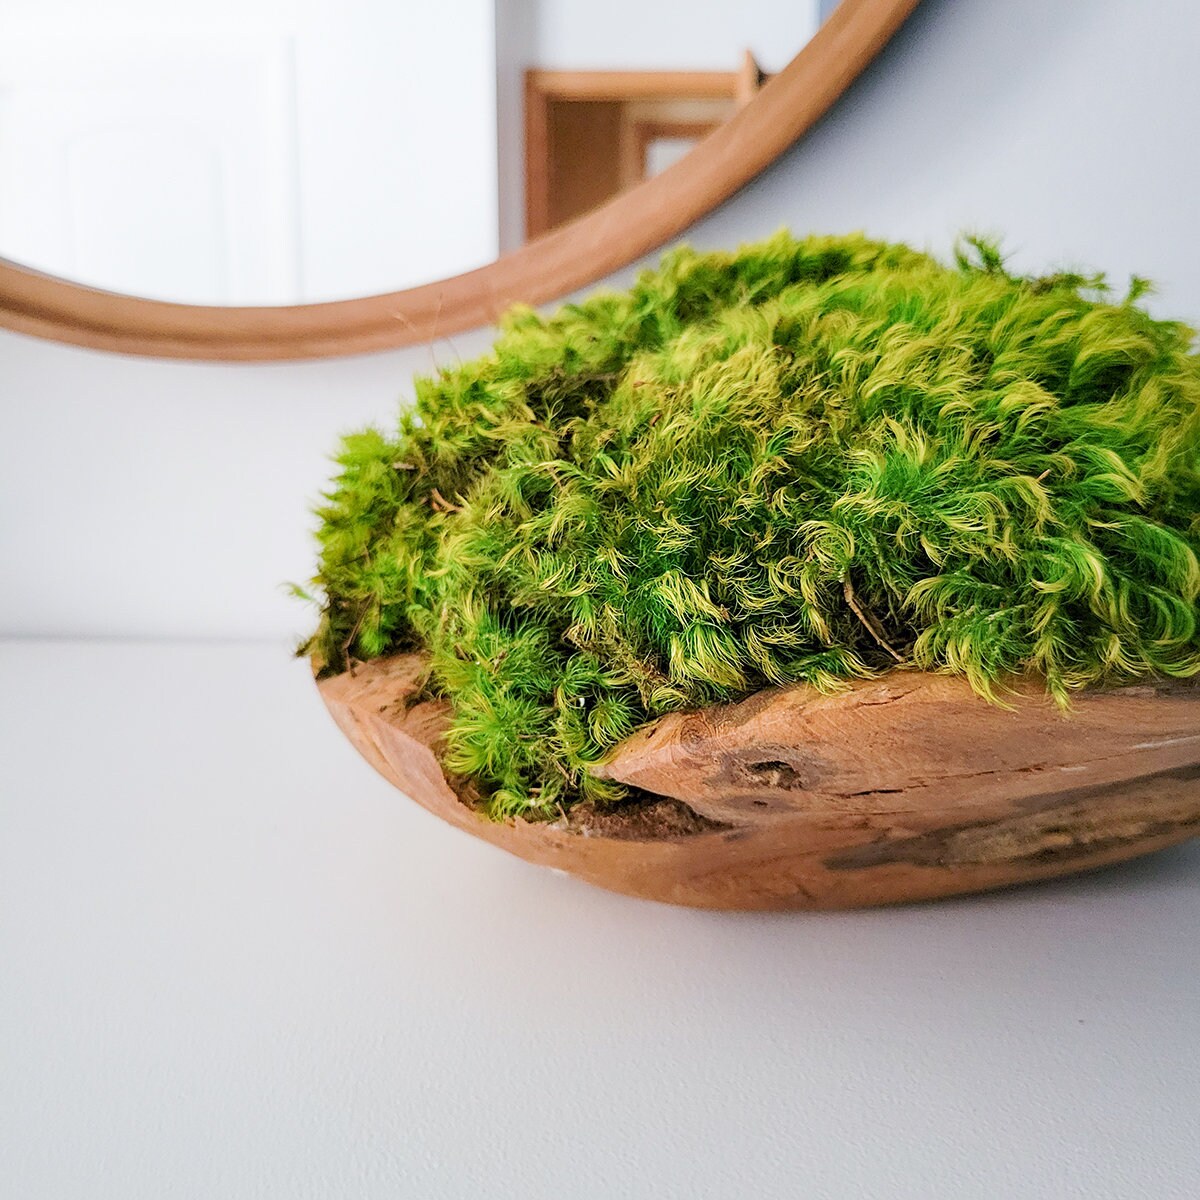 Moss Bowl Centerpiece | Wooden Bowl w preserved mood moss | Natural Decor | Coffee Table Decor |  Modern Comtempororay Decoration | Design